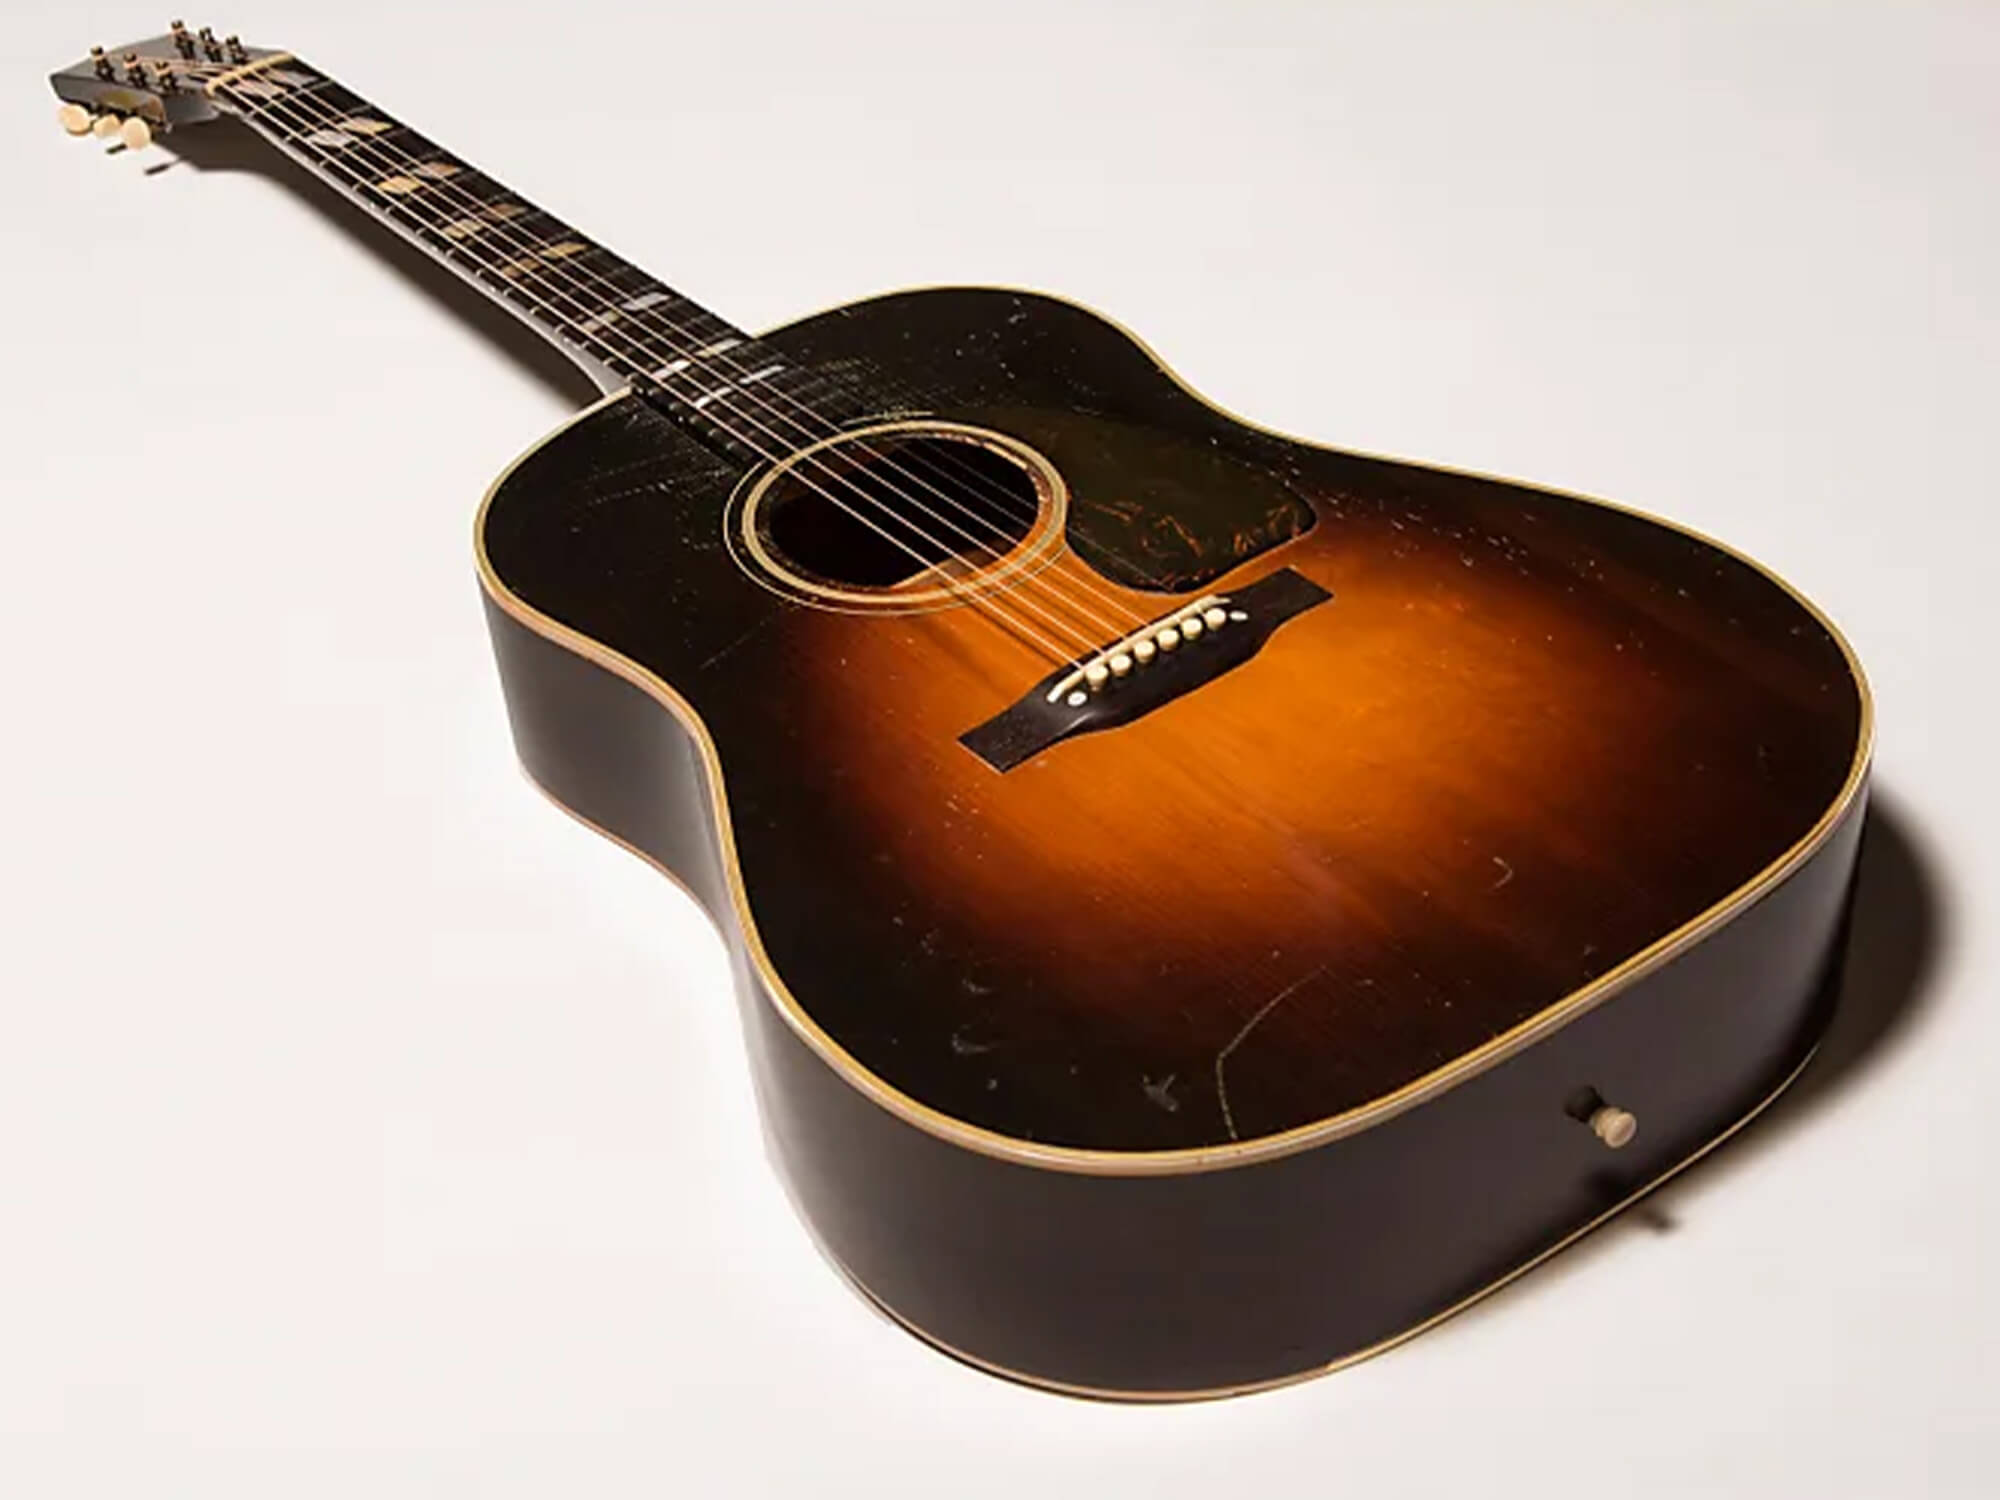 1943 Southern Jumbo Dreadnought acoustic